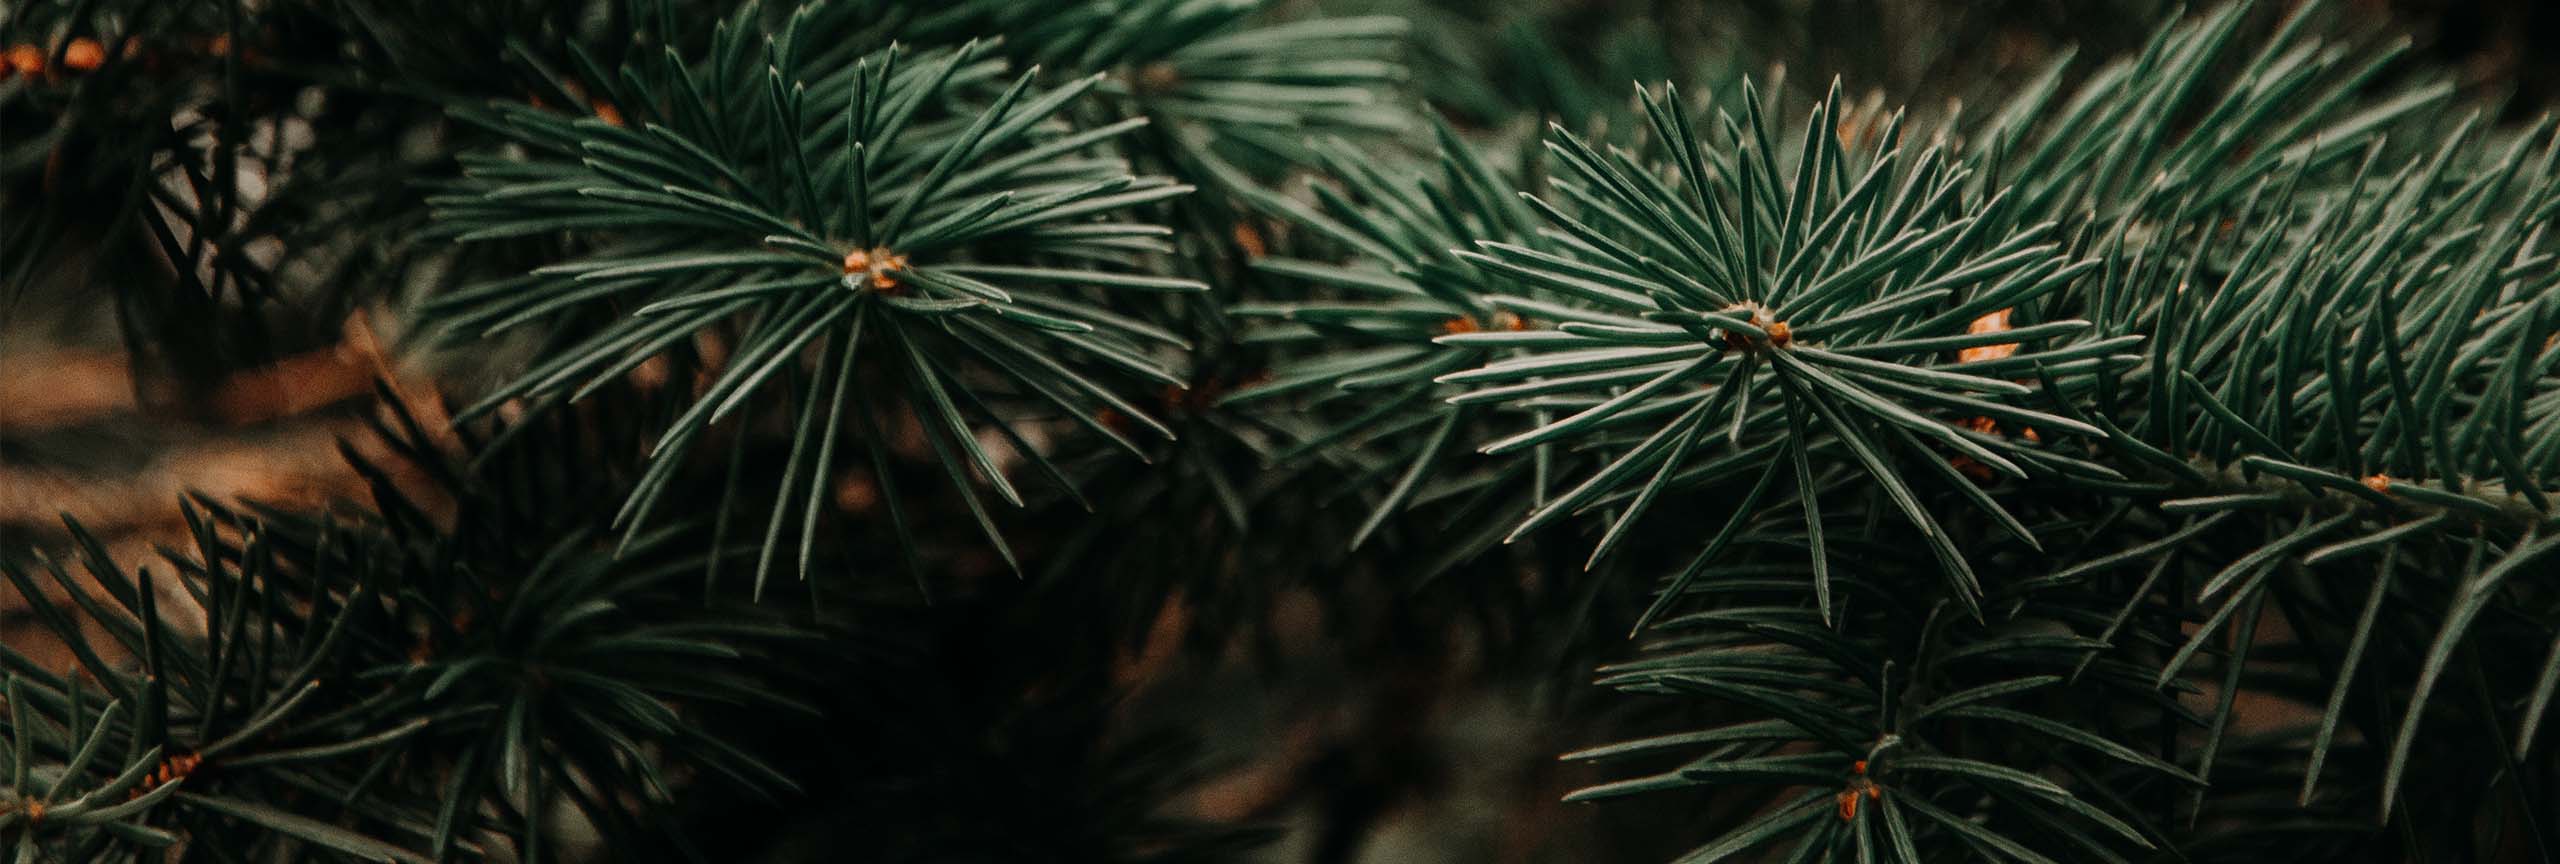 Close up of Christmas tree and pine needles